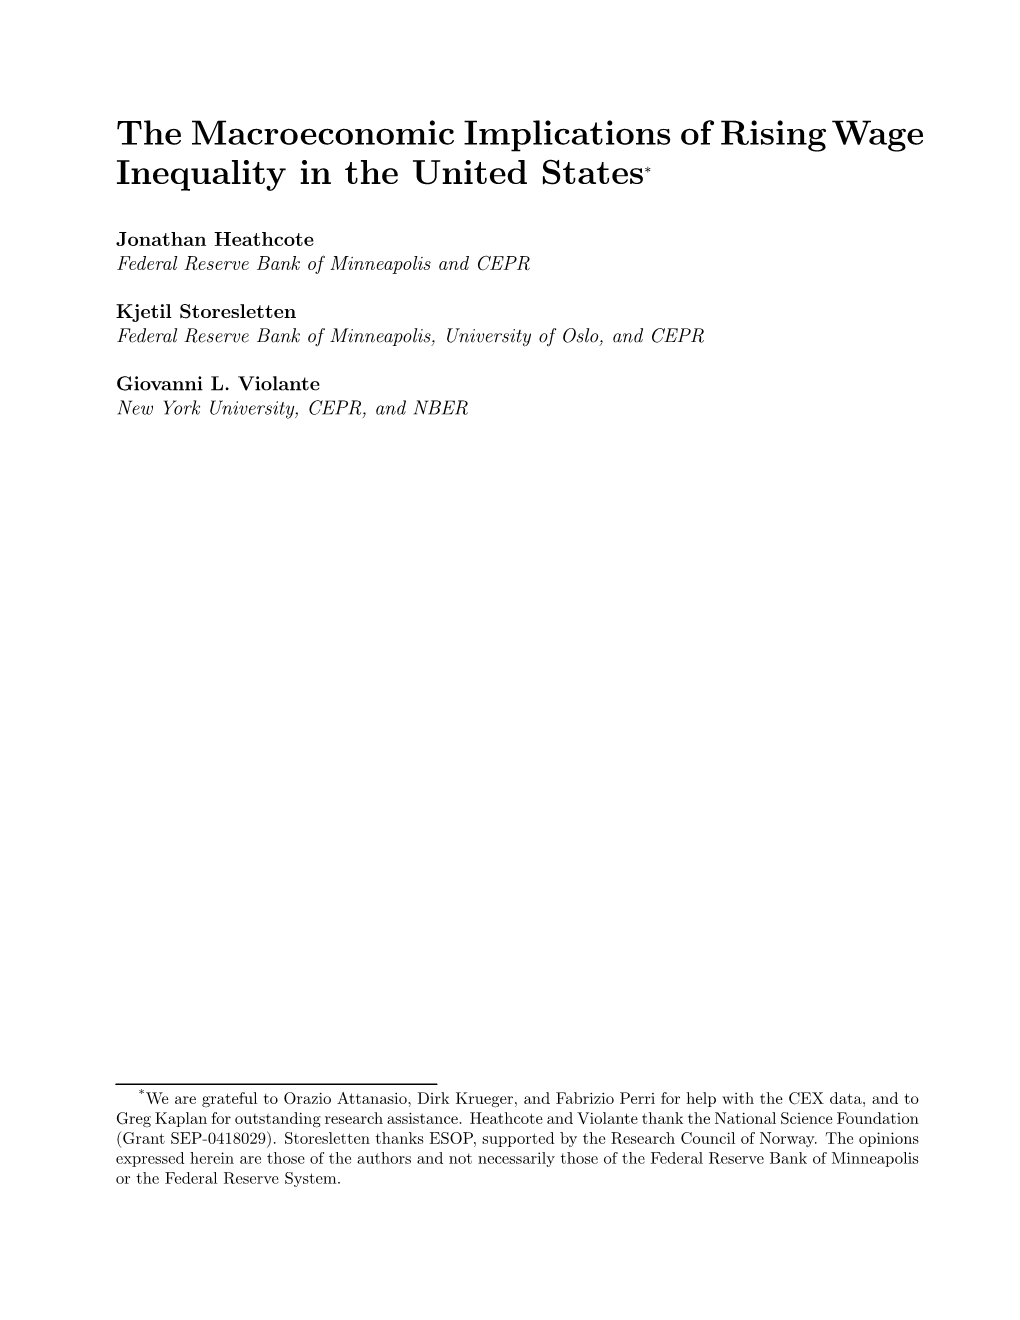 The Macroeconomic Implications of Rising Wage Inequality in the United States*